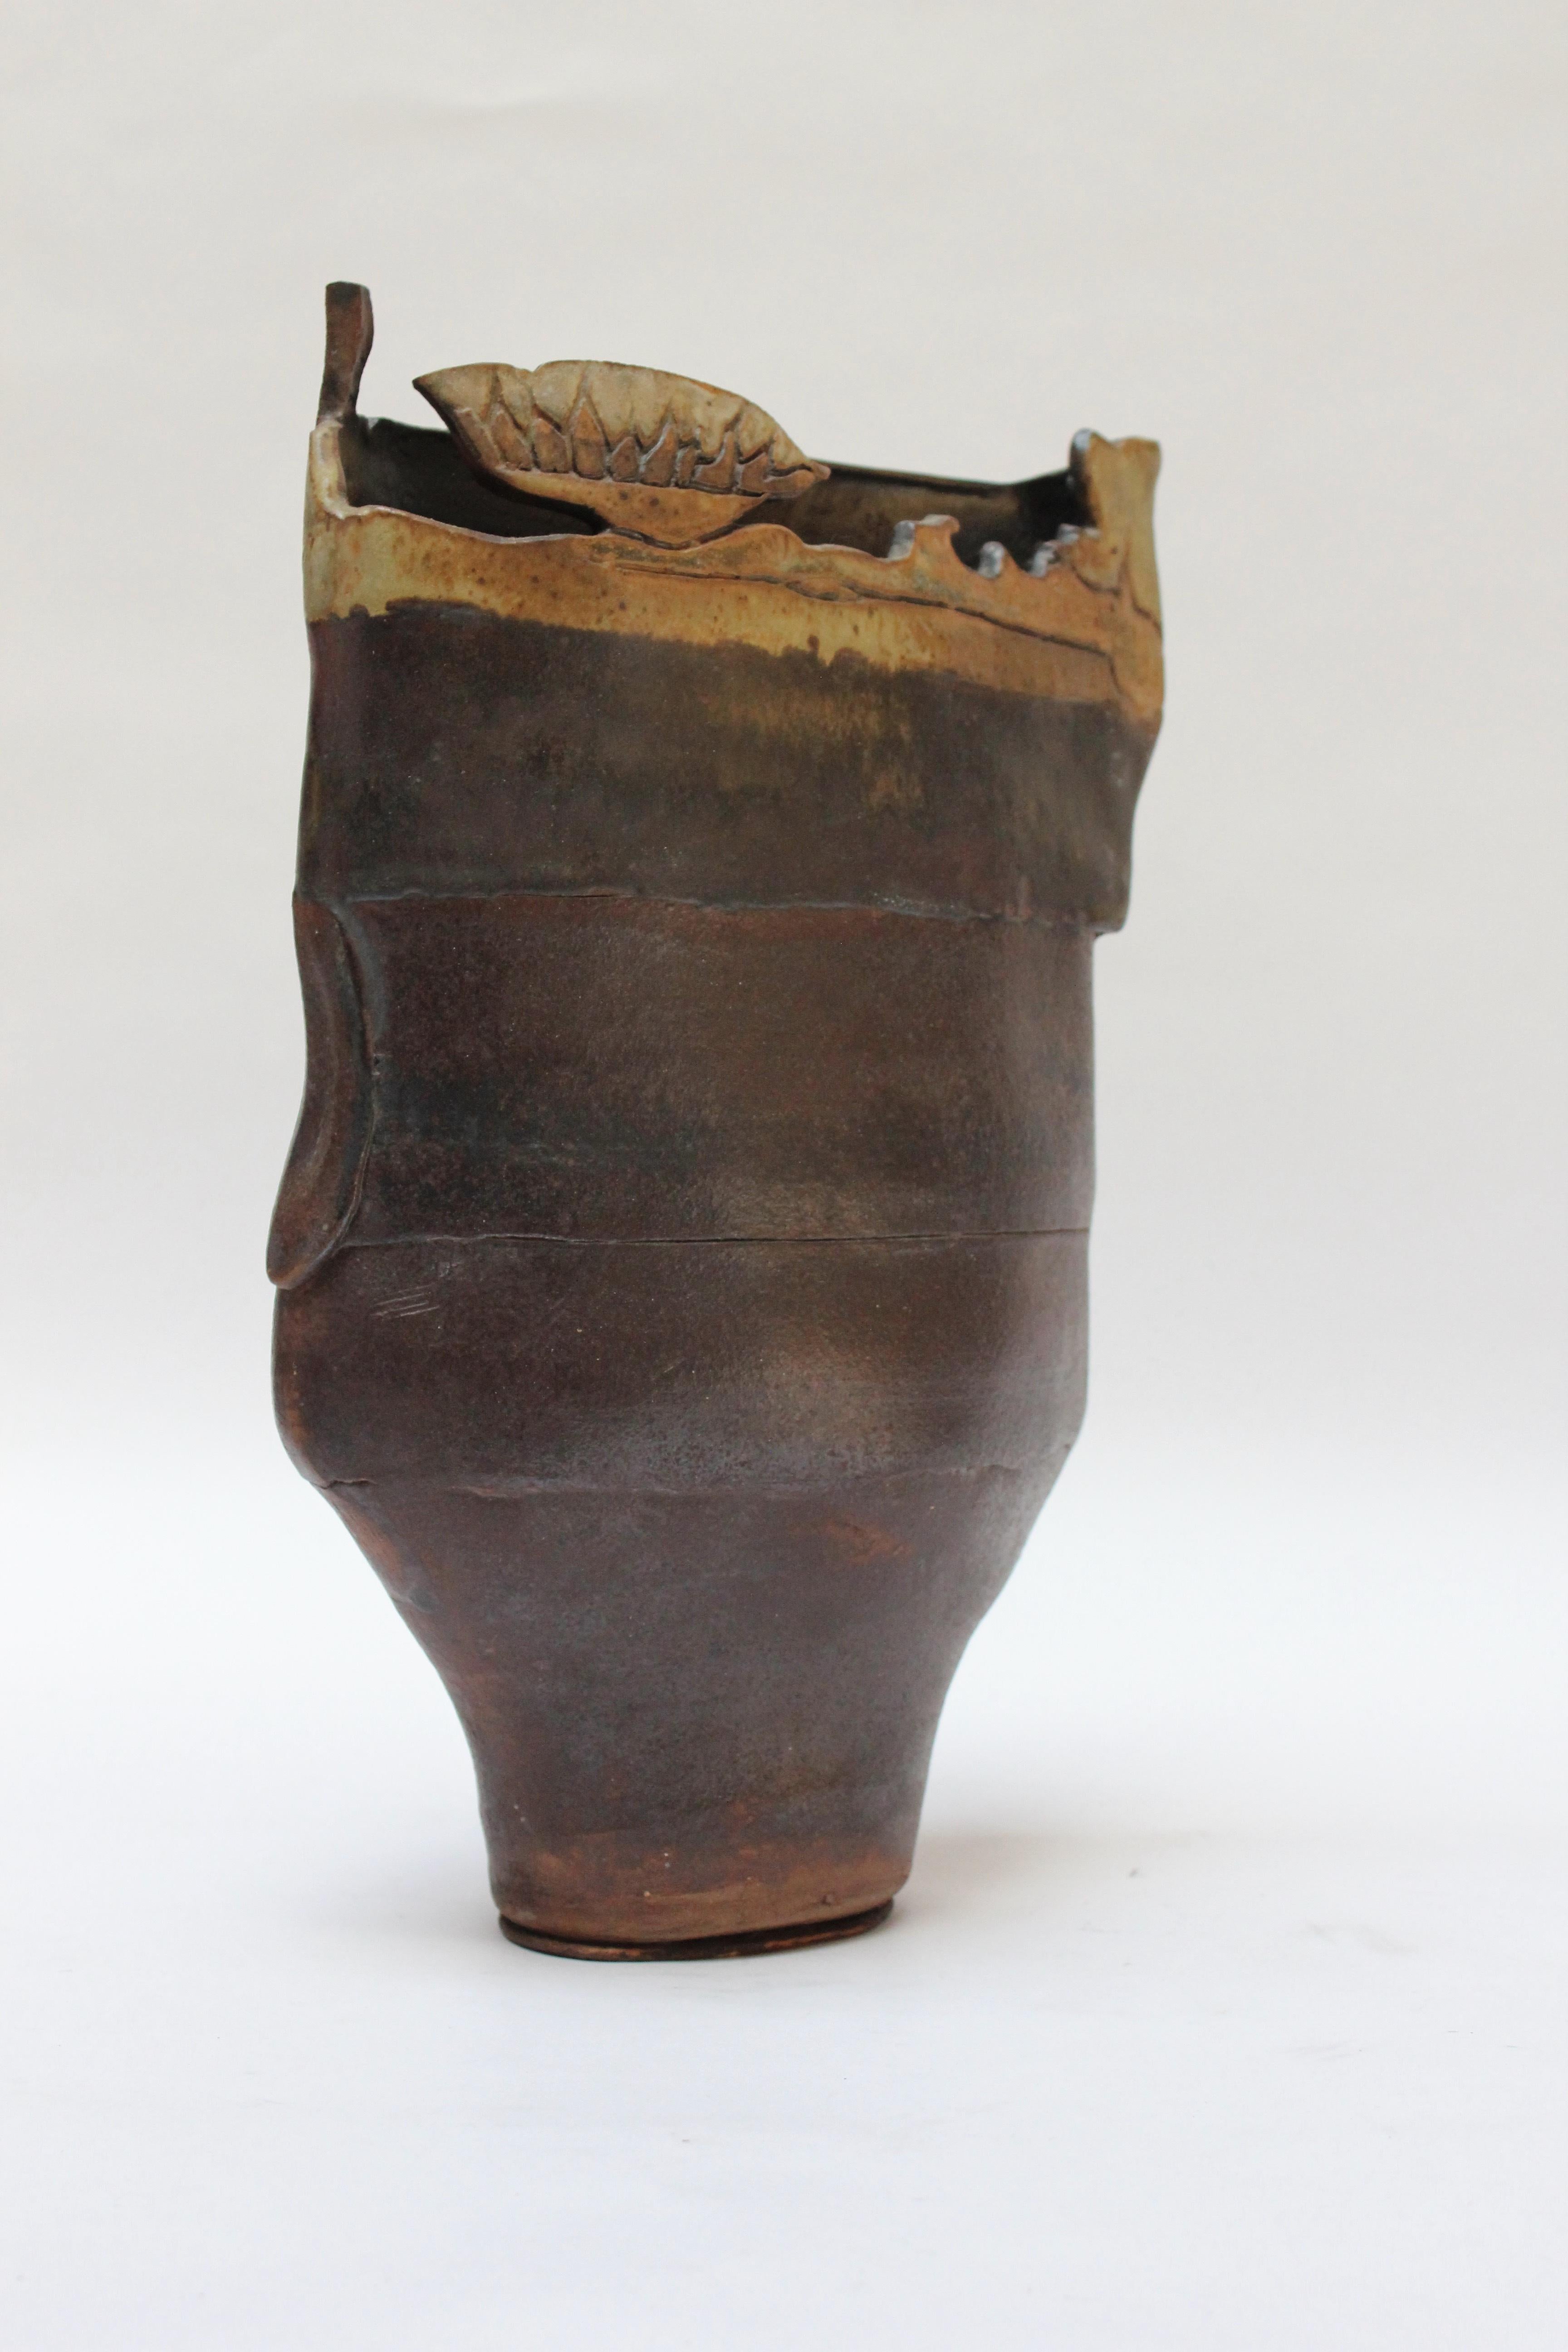 Studio stoneware vase in deep burgundy with ochre applied details (ca. 1970s, USA). Interesting textural and geometric elements. Attributed to the ceramicist, Pollack, based on provenance and attributes (we have signed examples from the same